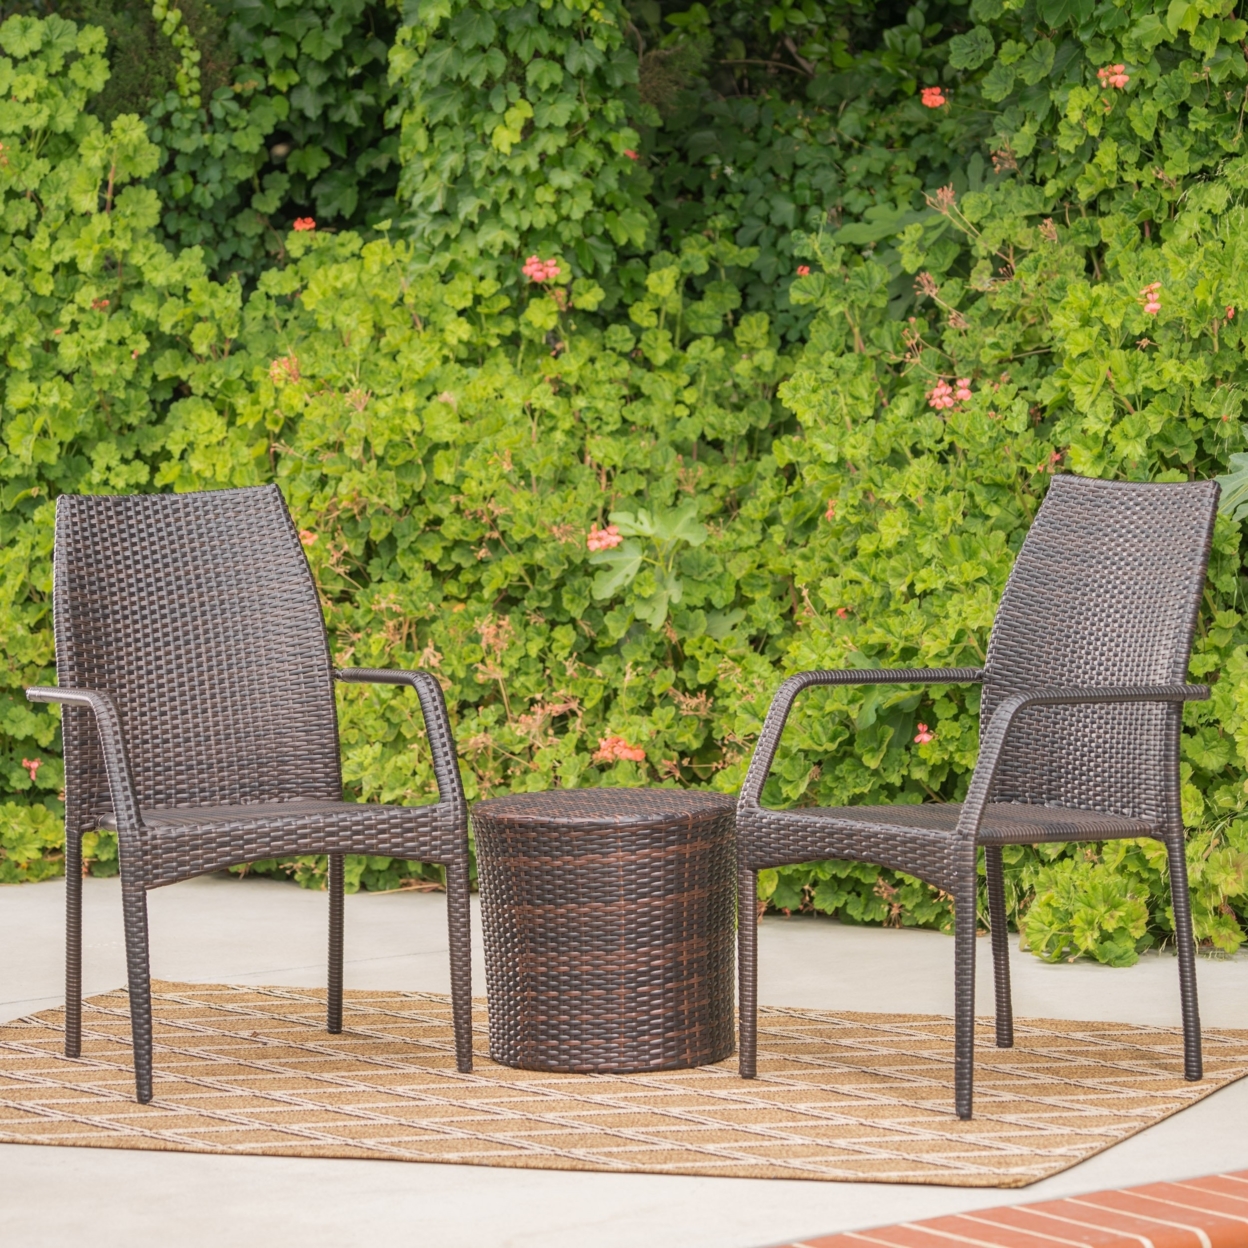 Dawson Outdoor 3 Piece Multi-brown Wicker Stacking Chair Chat Set - Box Table, Brown